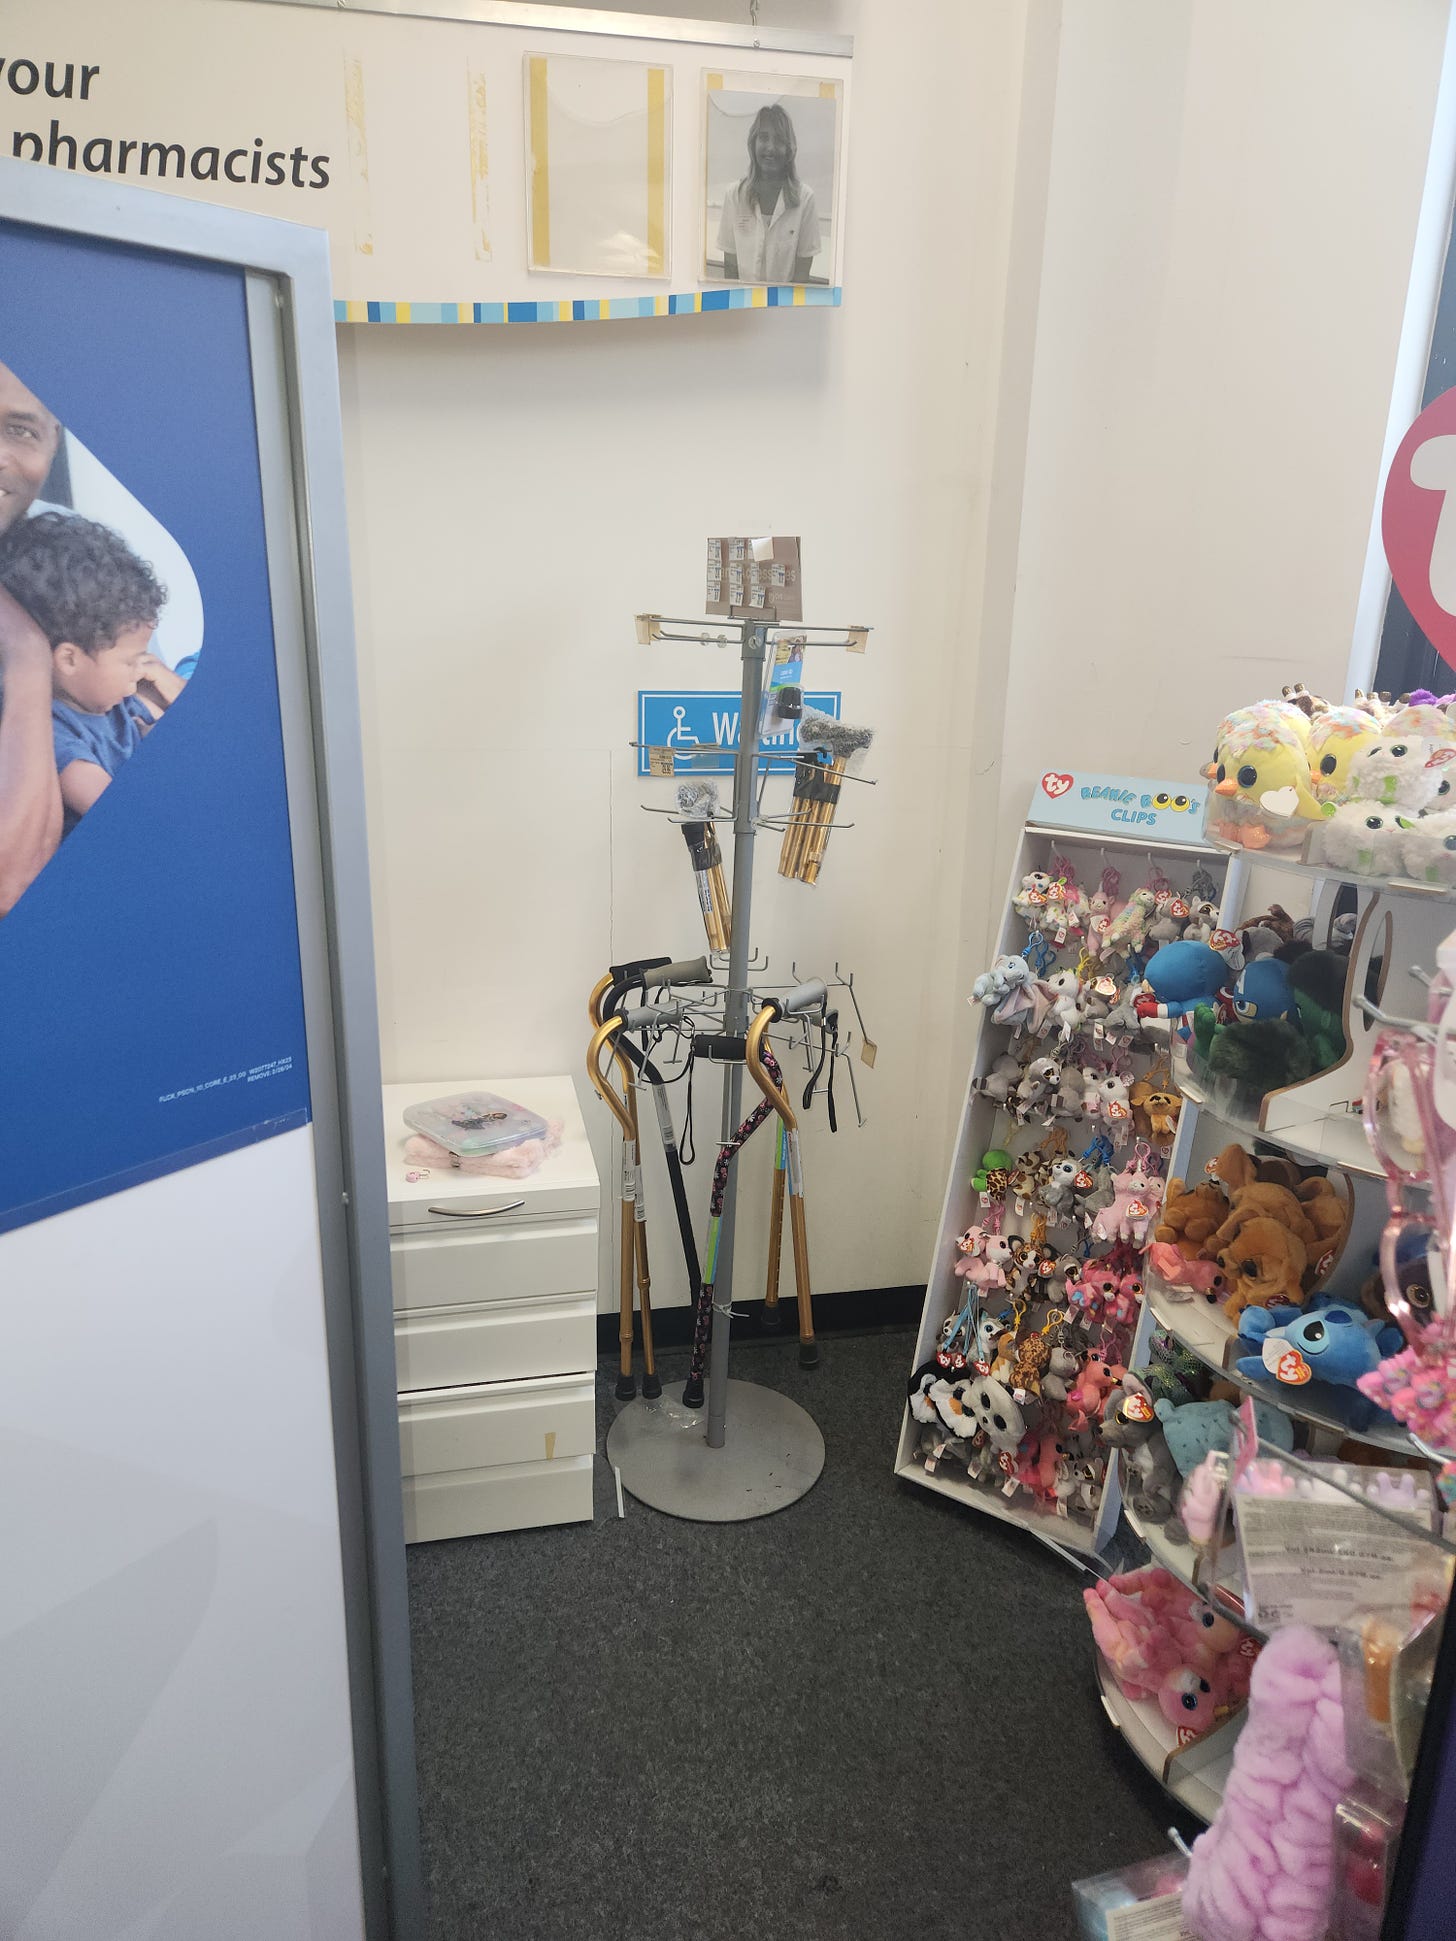 image of a pharmacy consult area for people with disabilities, but blocked with merchandise and other items.